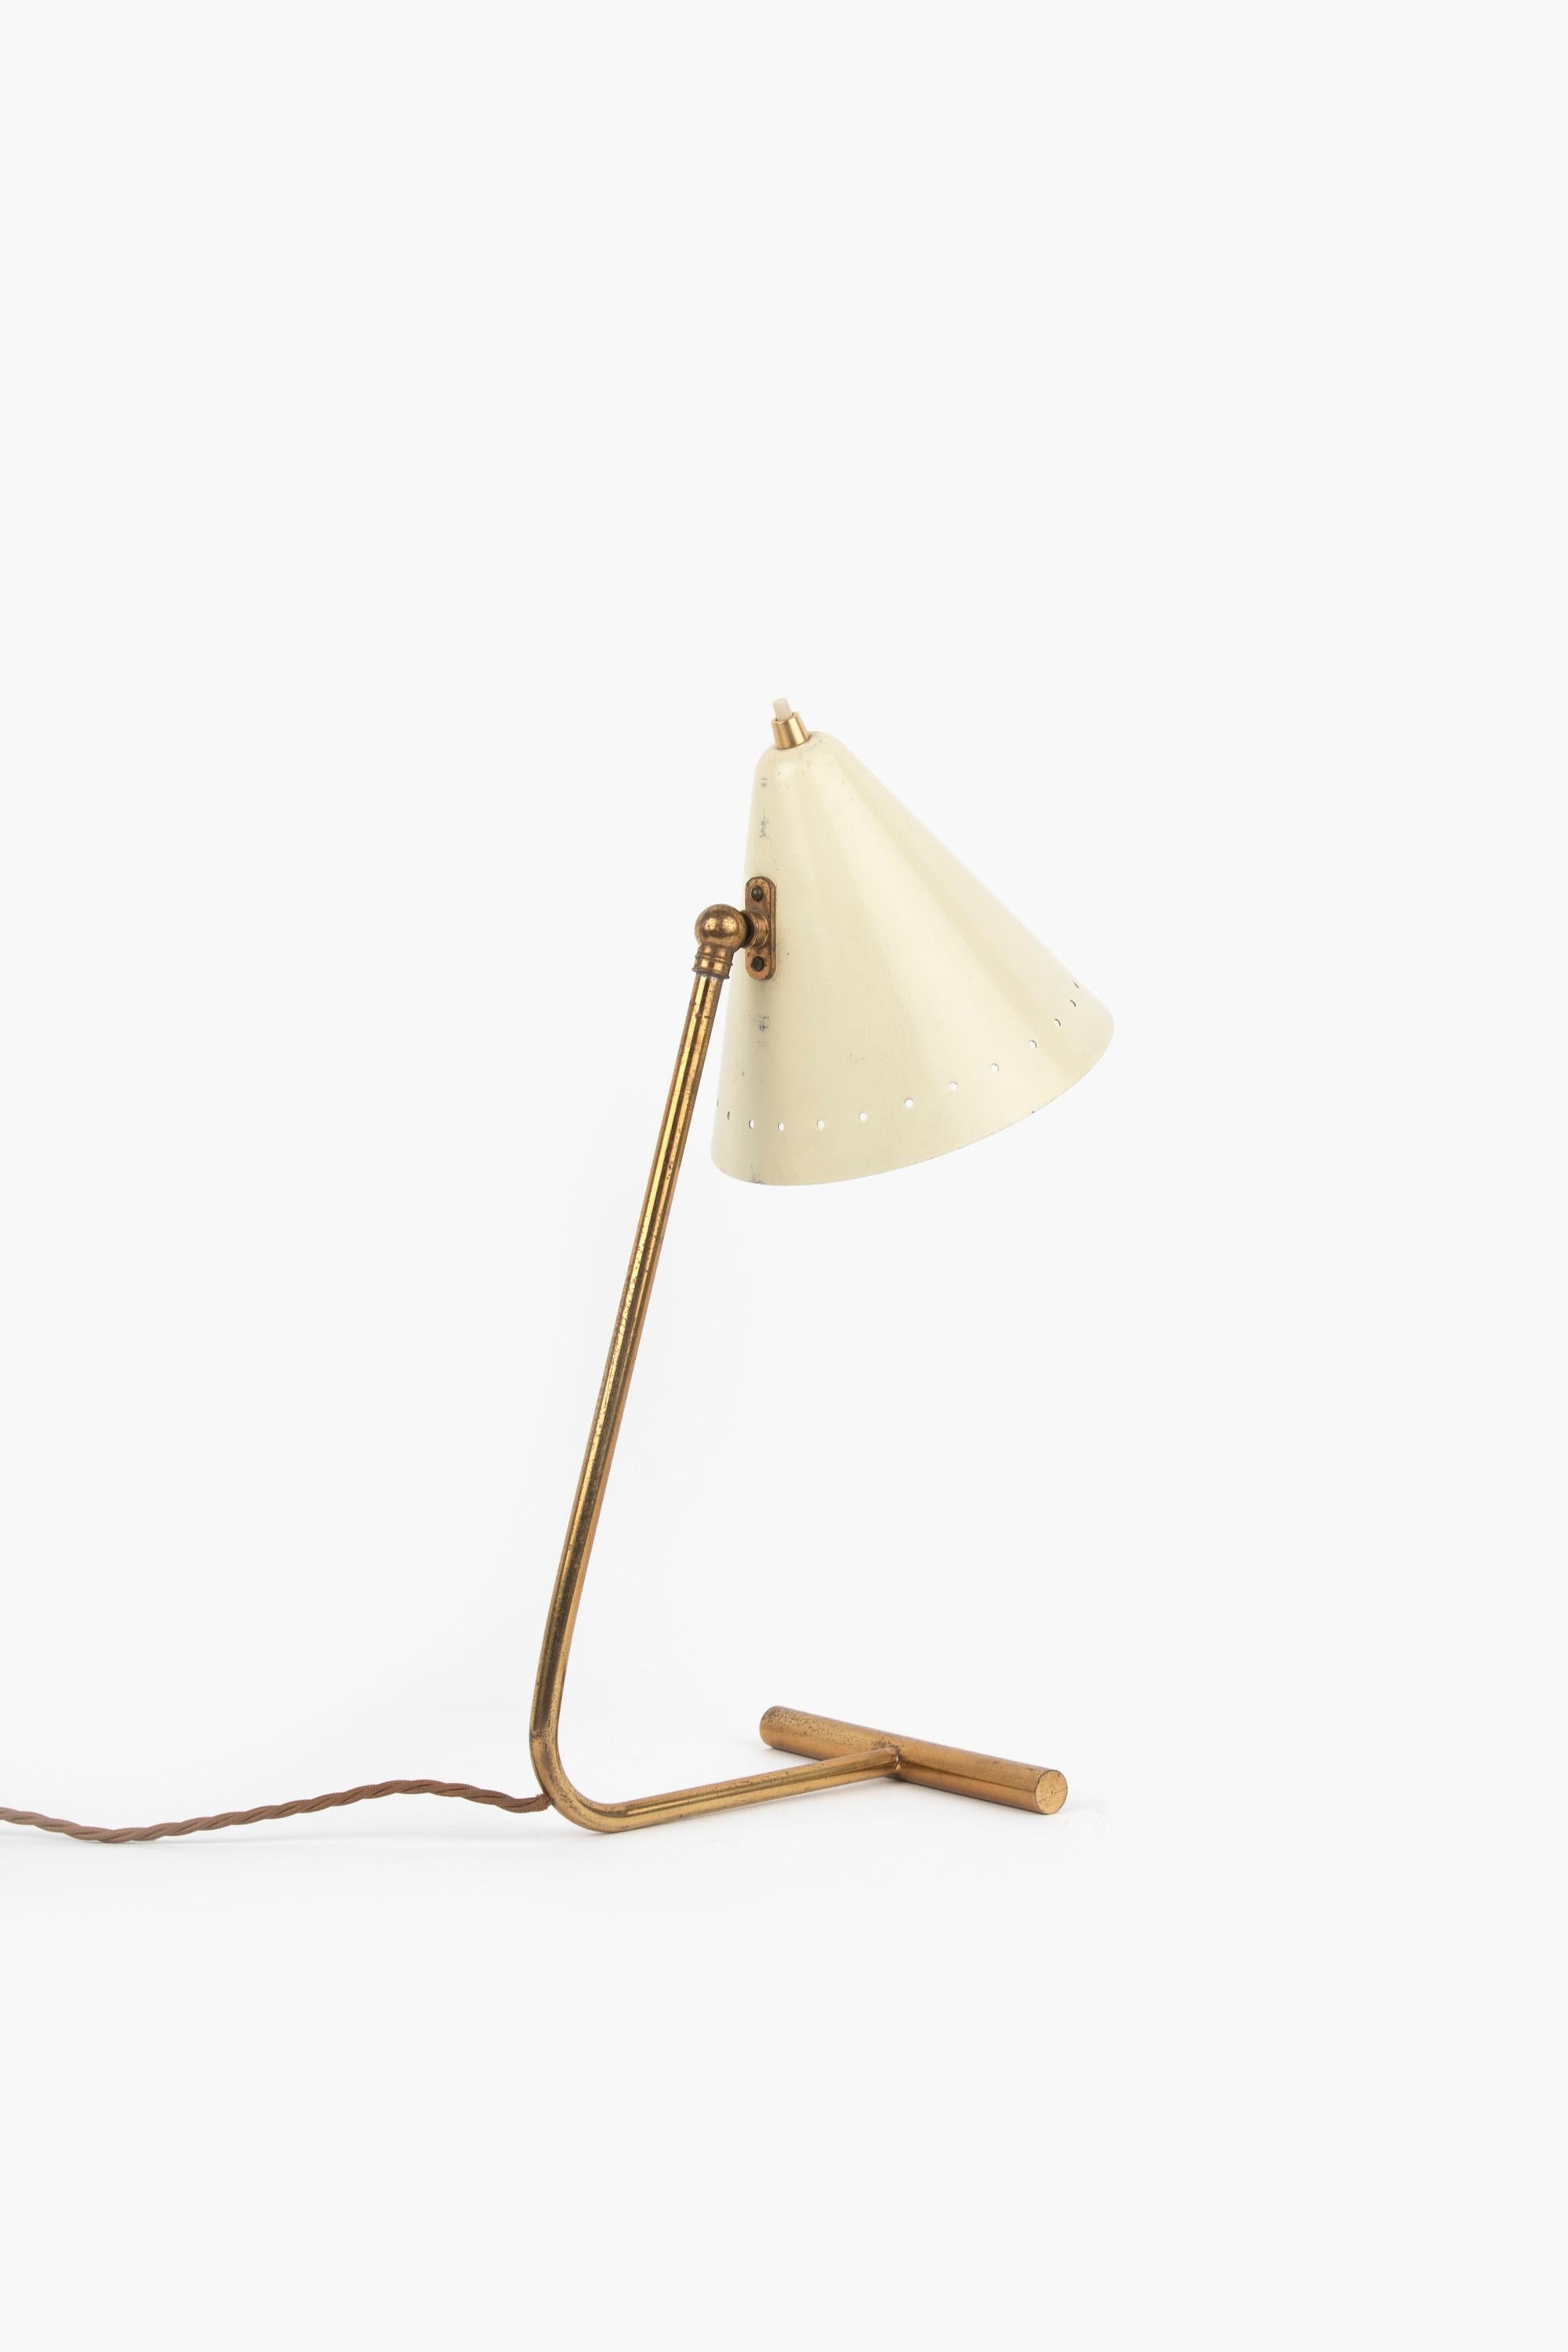 1950s Italian Desk Lamp by Gilardi & Barzaghi In Good Condition For Sale In London, GB